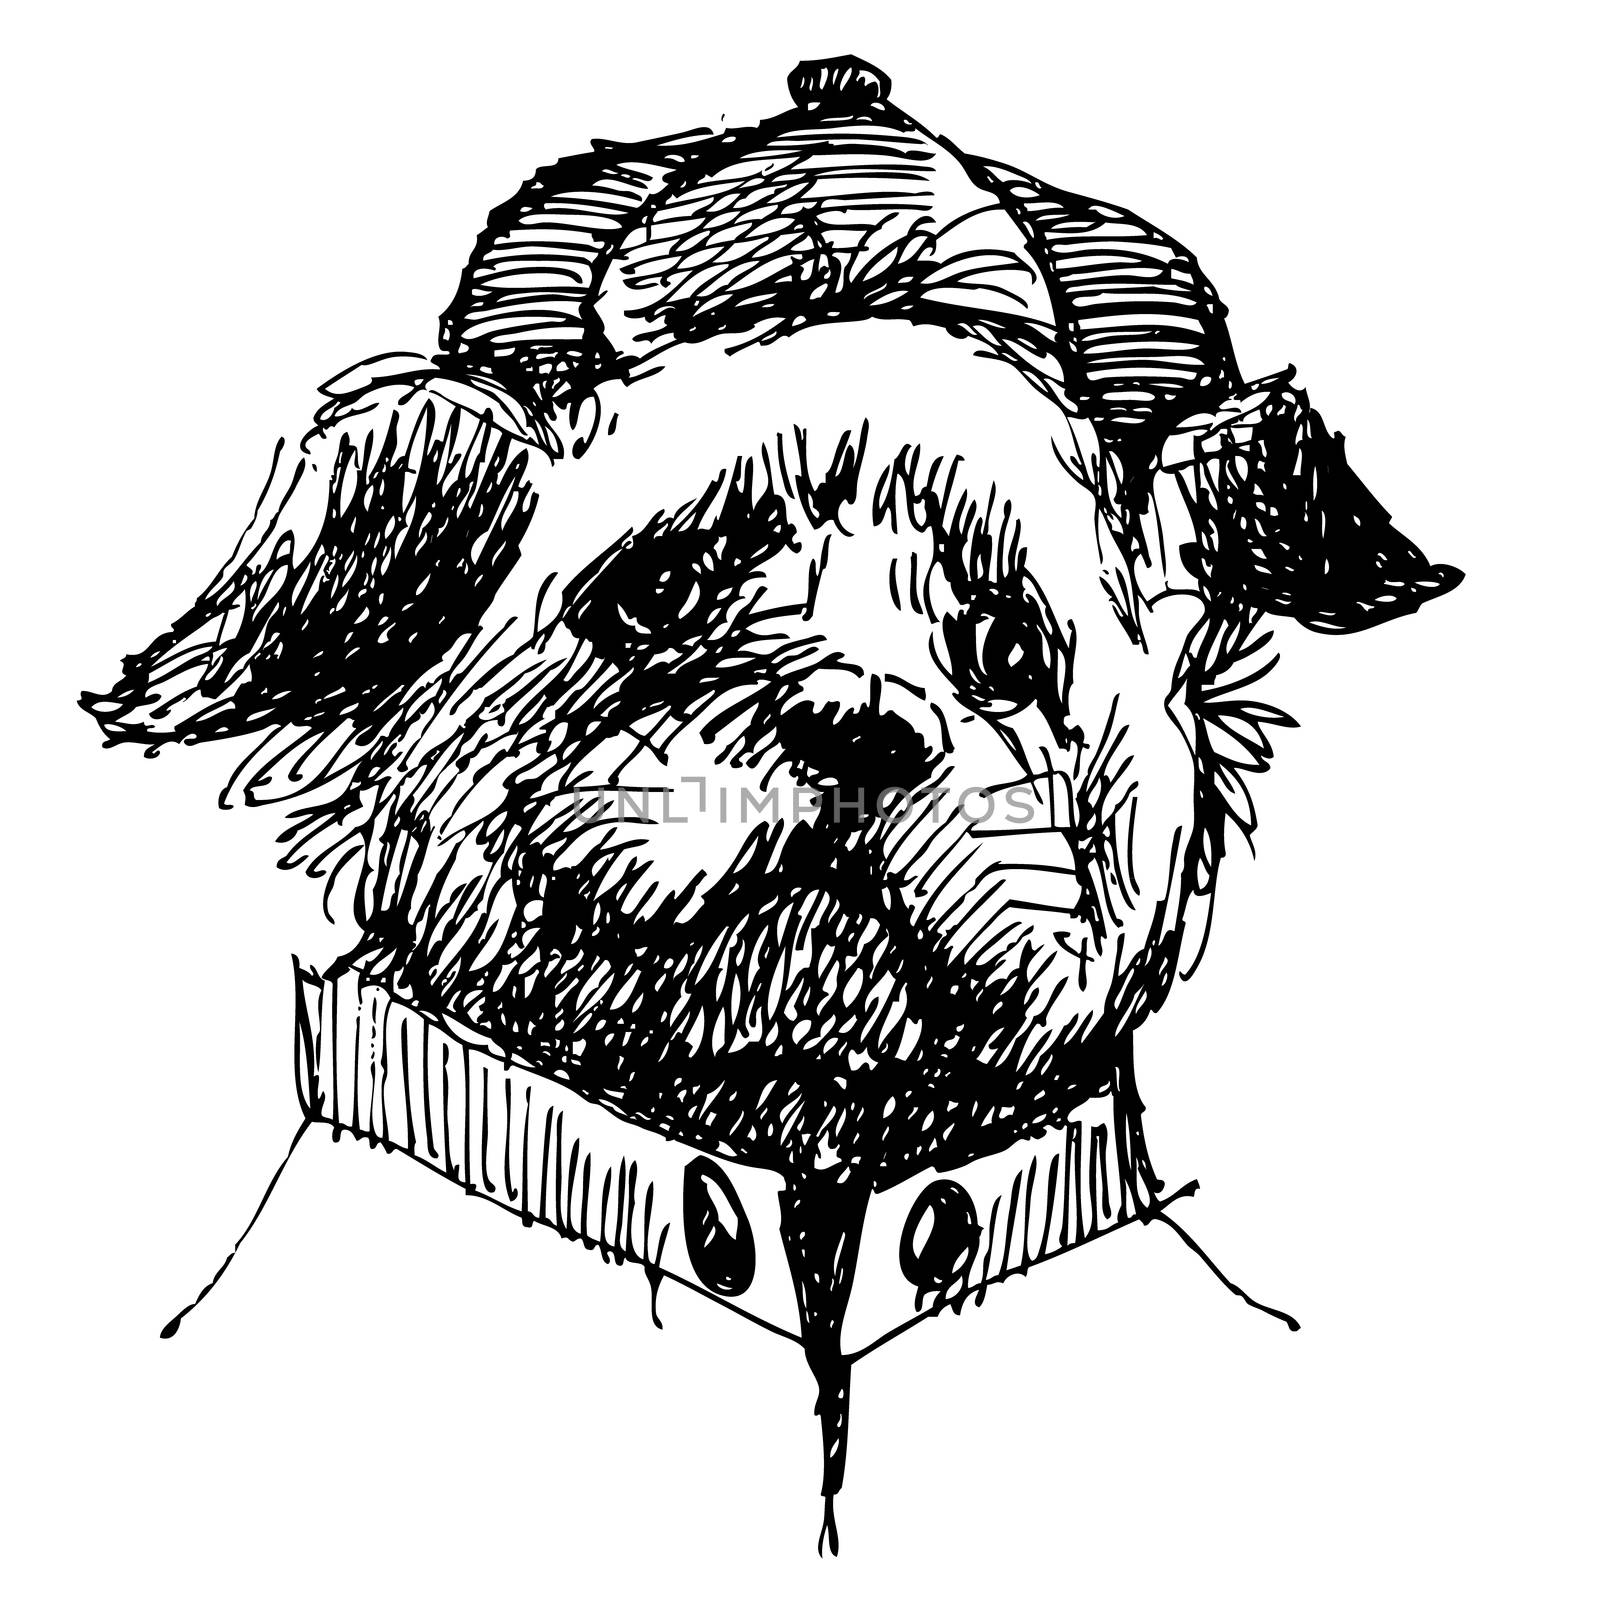 Shih tzu with shirt and hat, hand drawn vector.